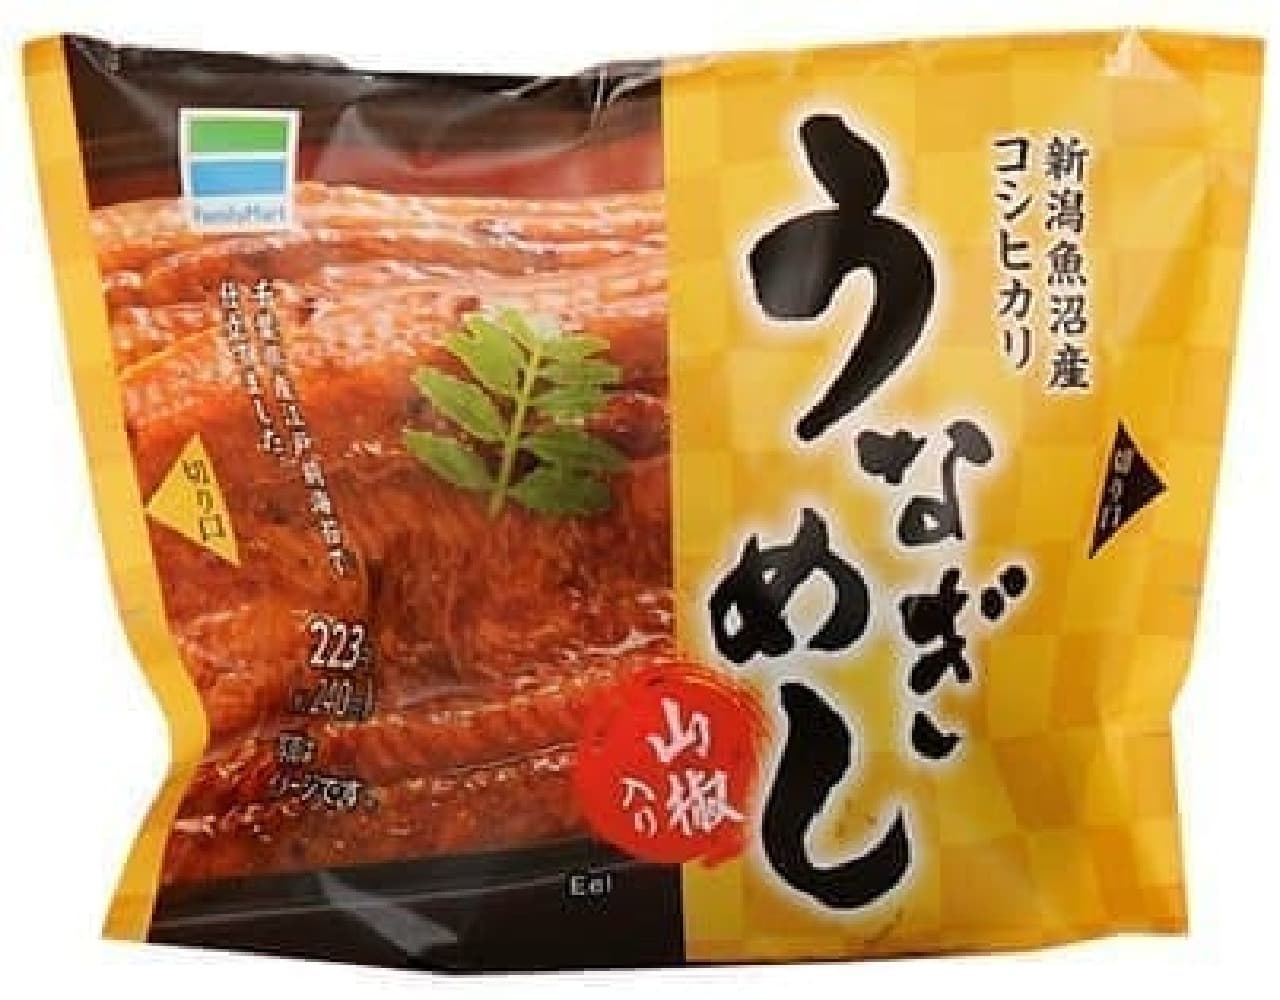 "Unagi rice" that you can buy at convenience stores